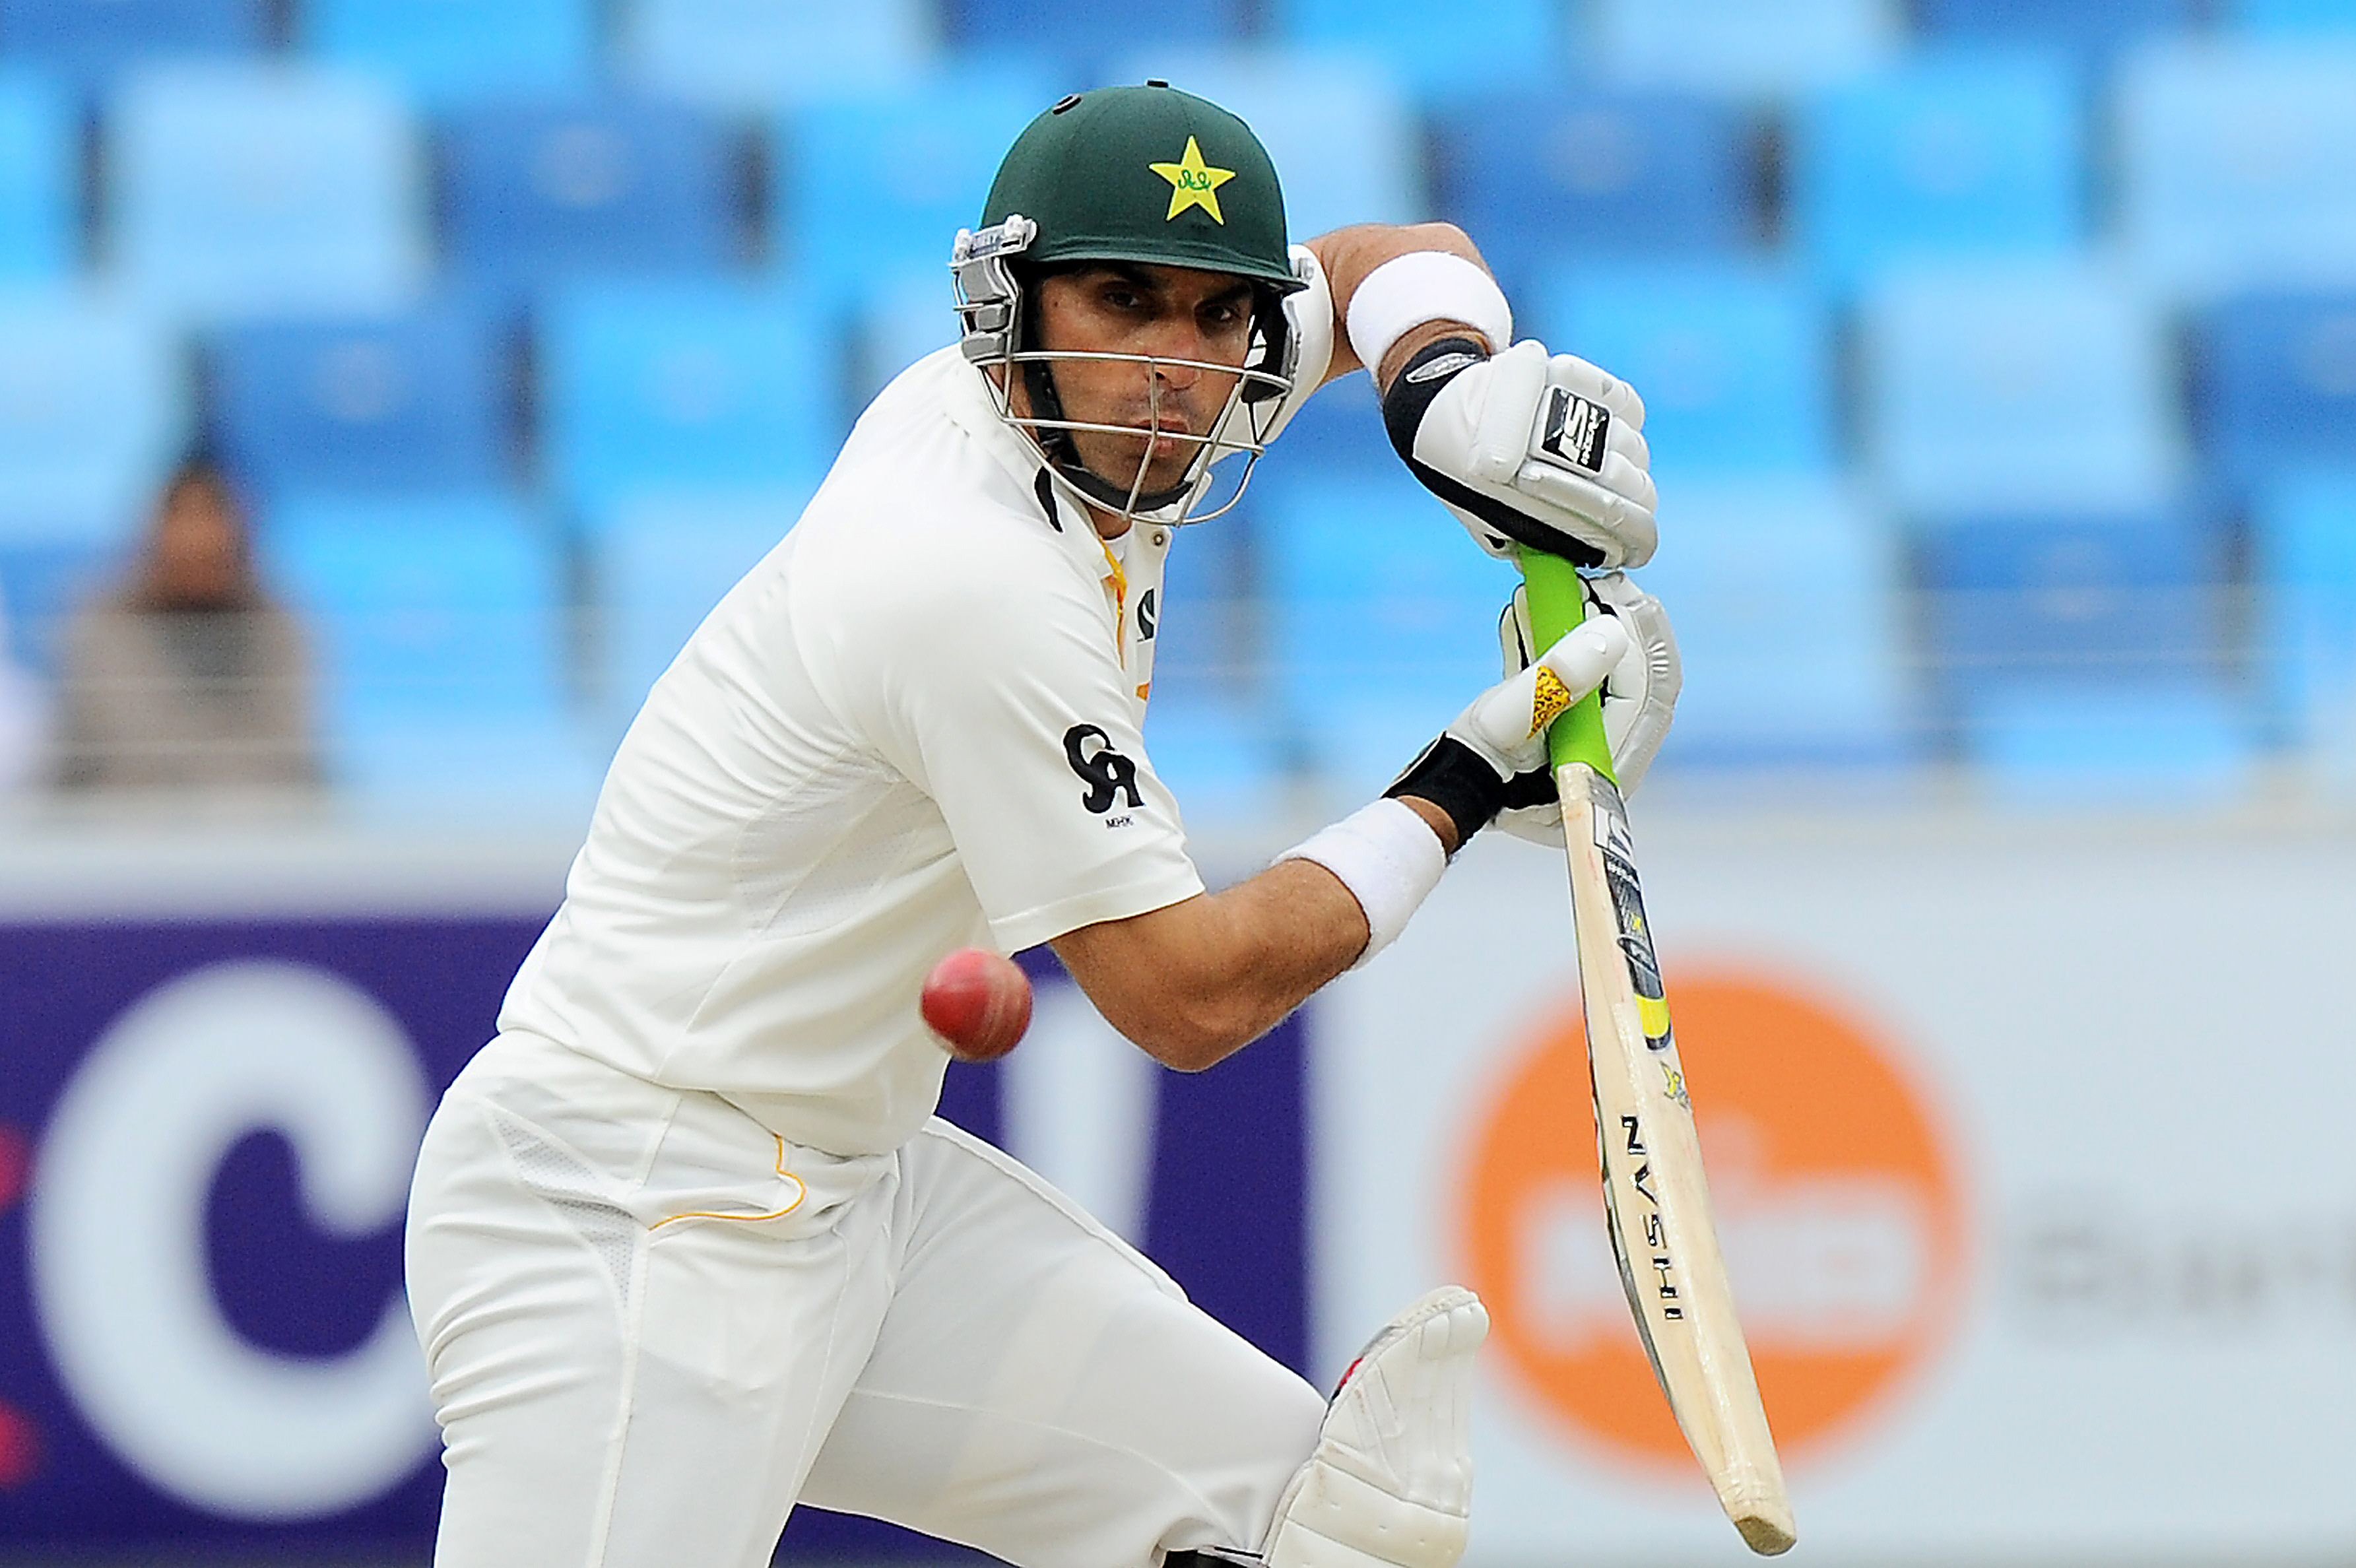 misbah ul haq plays a shot during the fourth day of the second cricket test match between pakistan and sri lanka at the dubai international cricket stadium in dubai on january 11 2014 photo afp